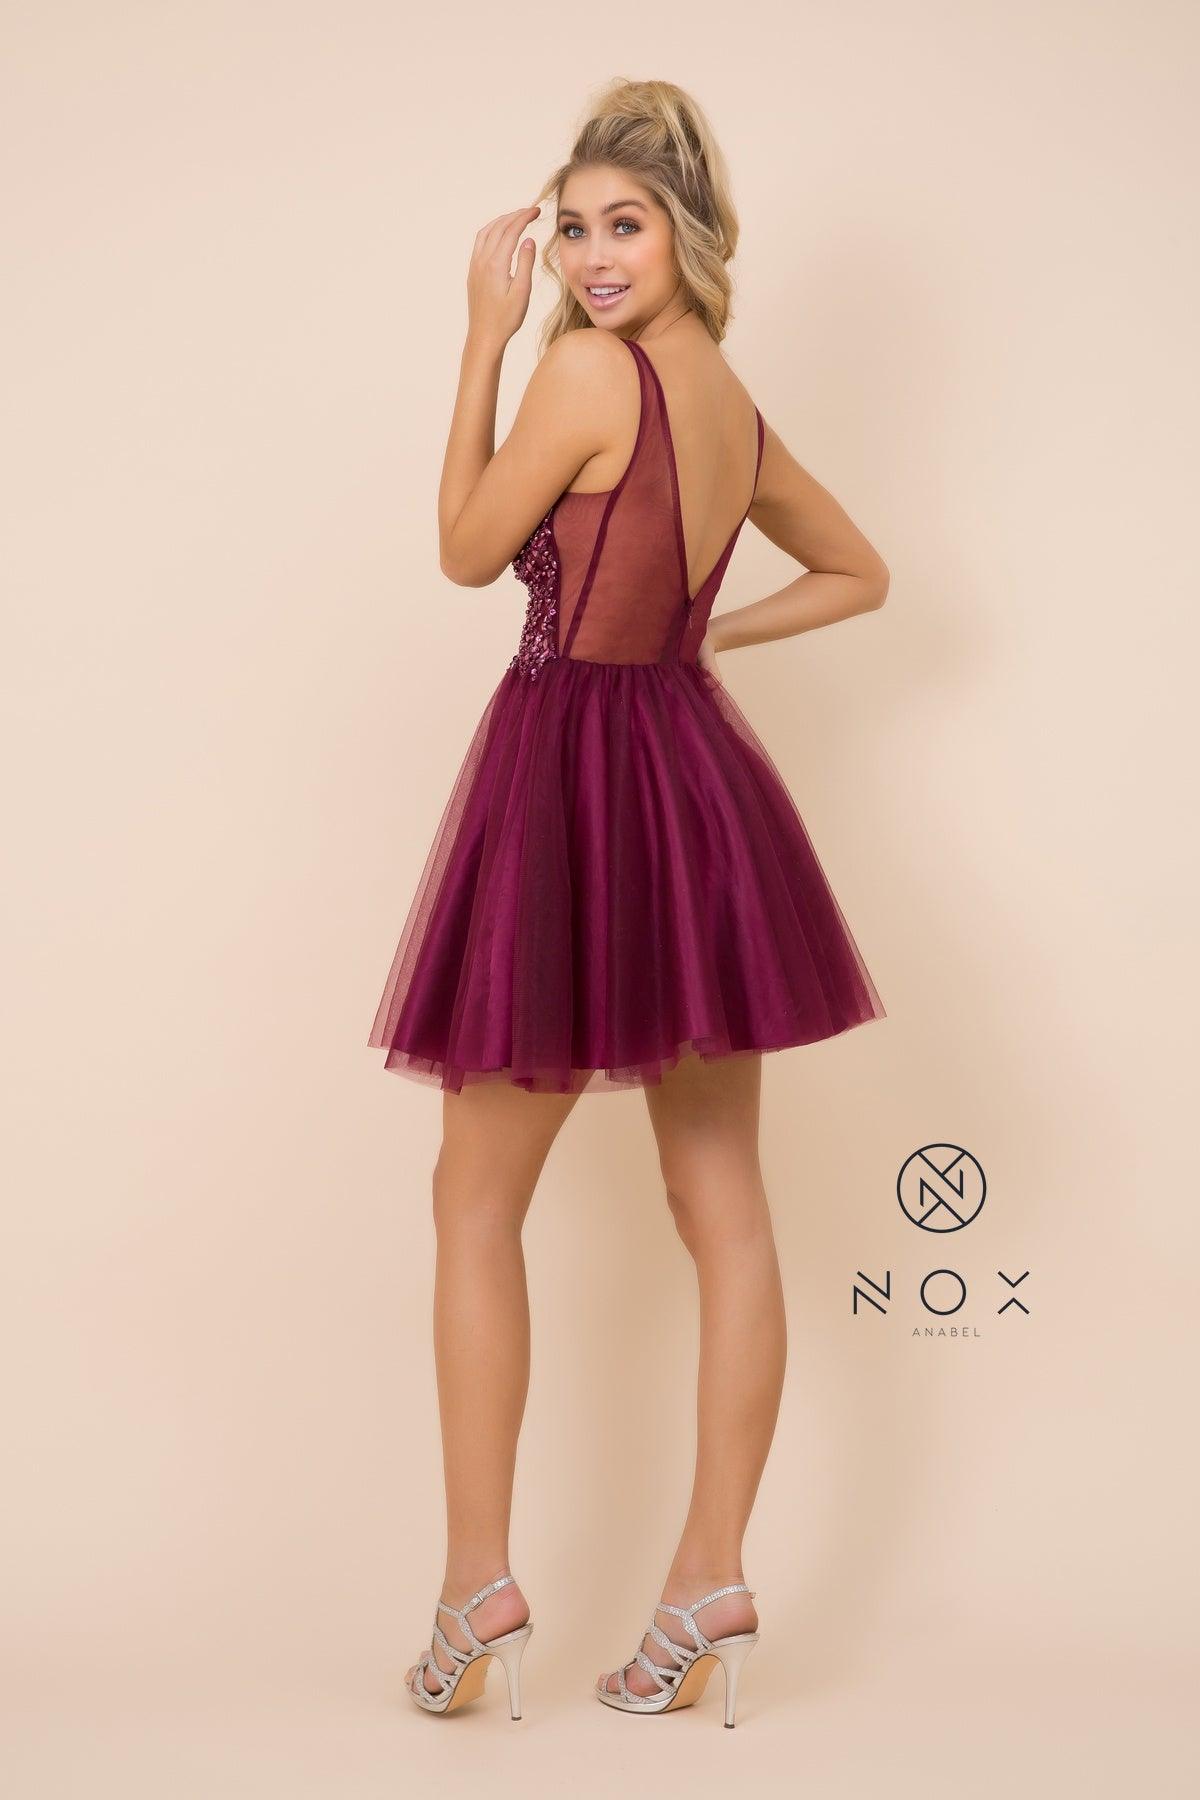 Sleeveless Short Prom Dress Homecoming - The Dress Outlet Nox Anabel